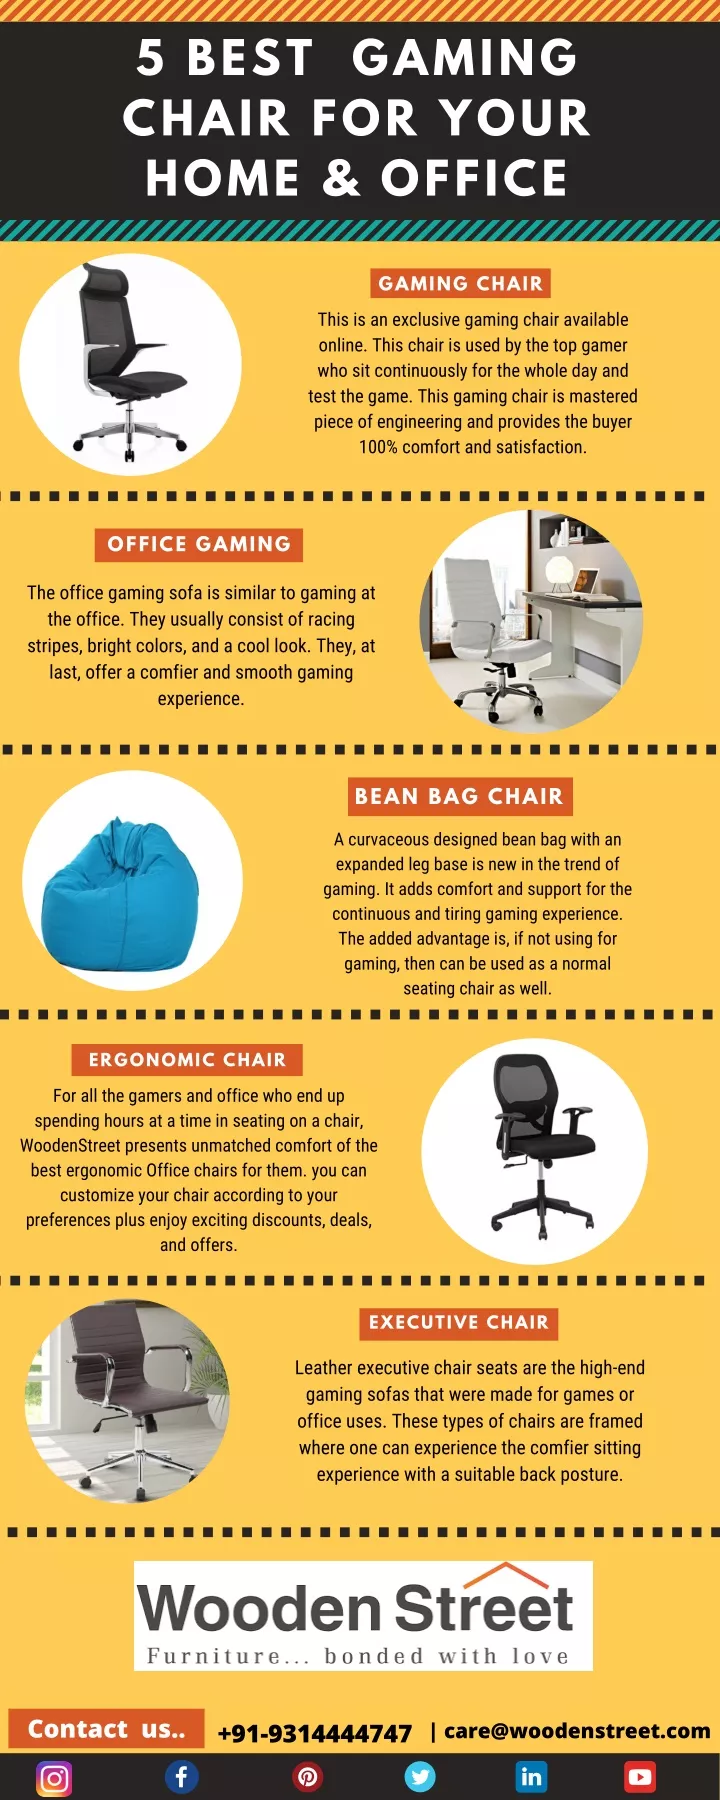 5 best gaming chair for your home office